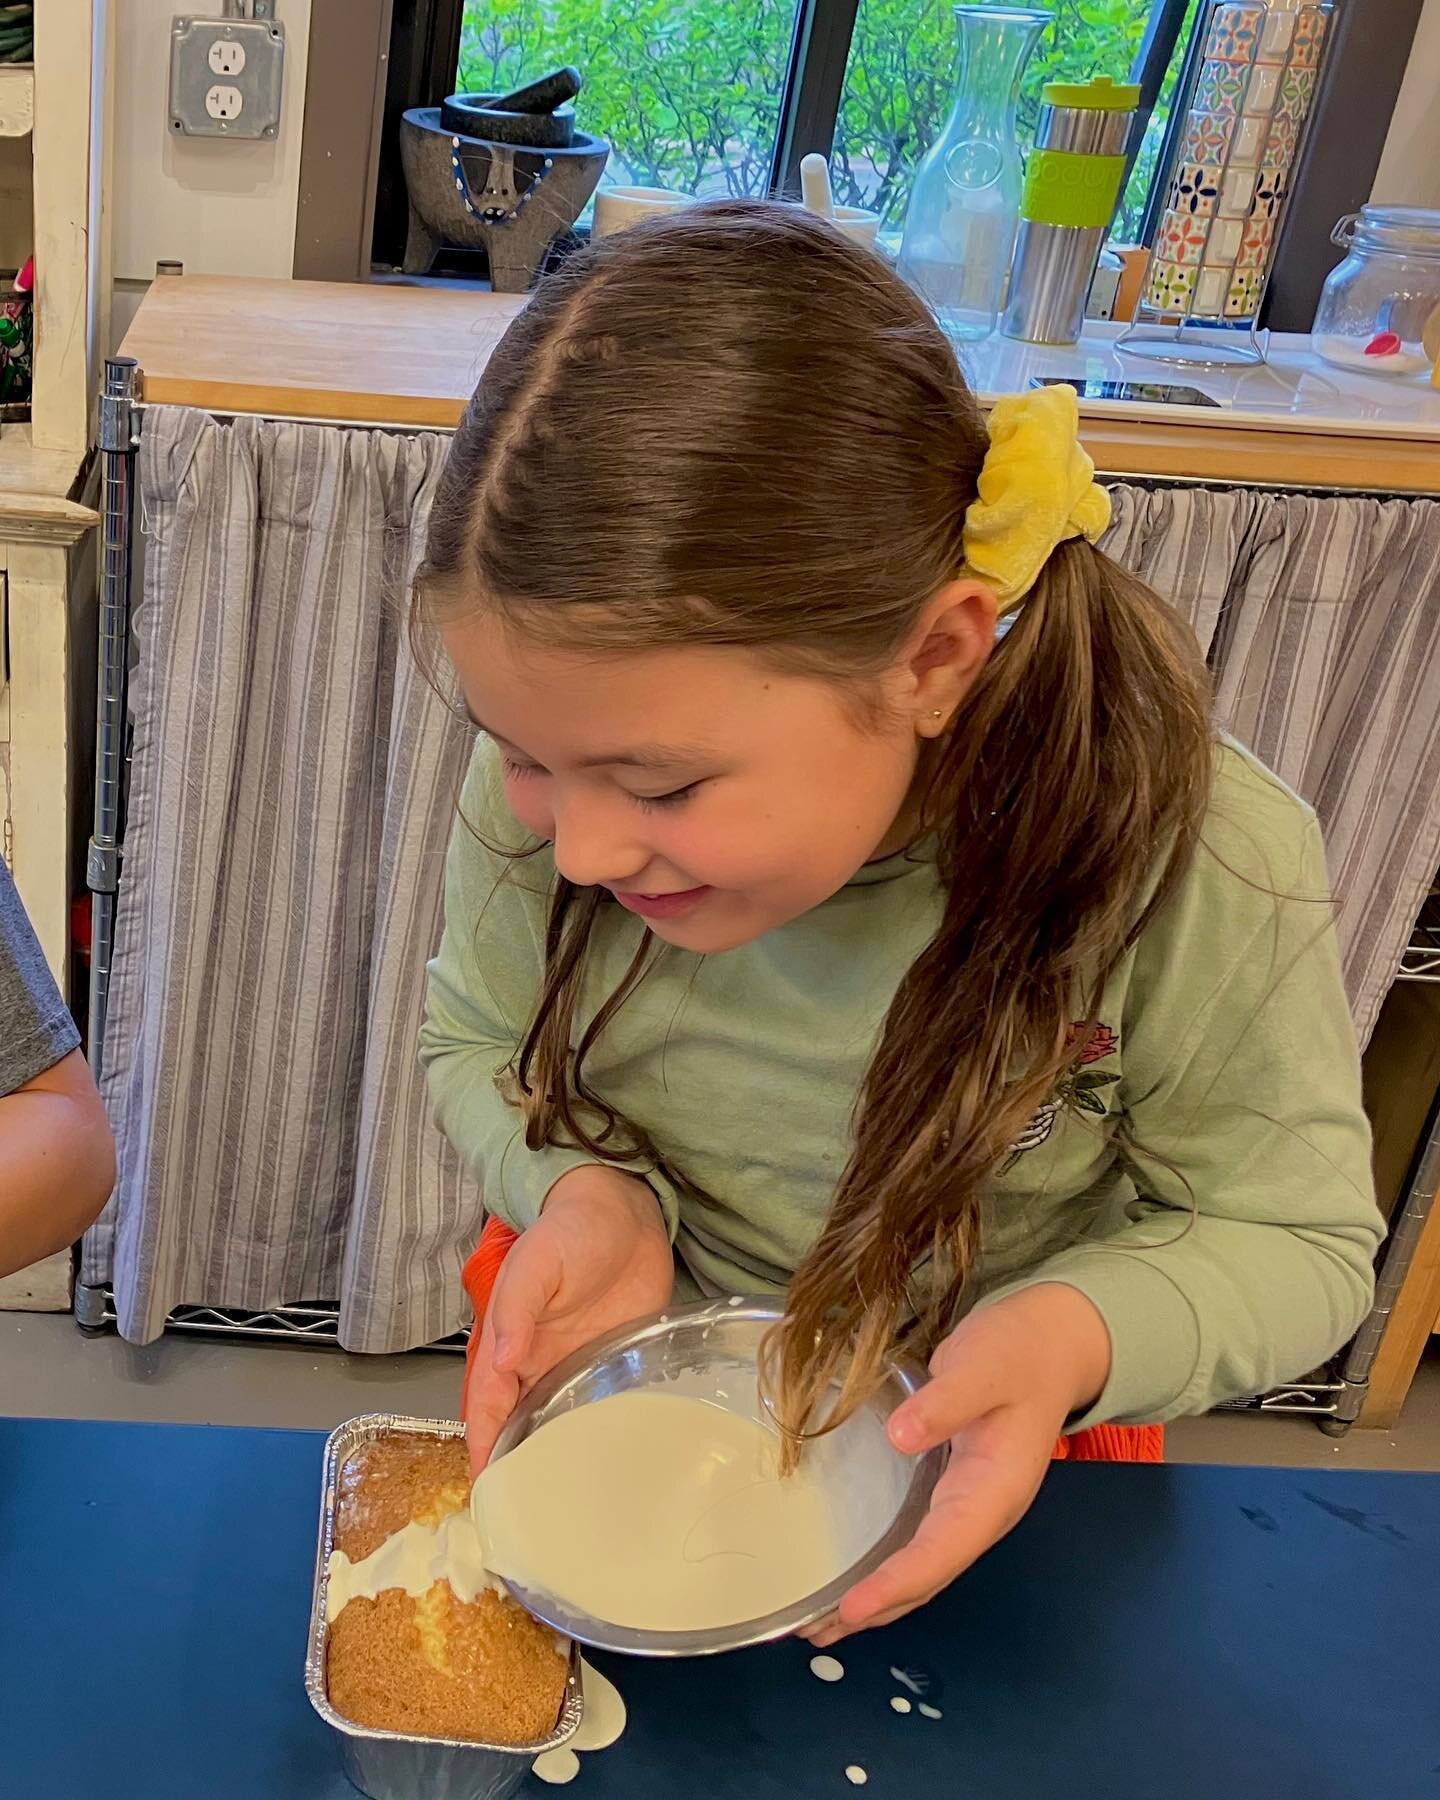 Sarah and Ari had a wonderful time teaching our little Bake Shop students how to make Tres Leches Cake for our After School Class. We still have space for our next session-click our website link for drop in options!